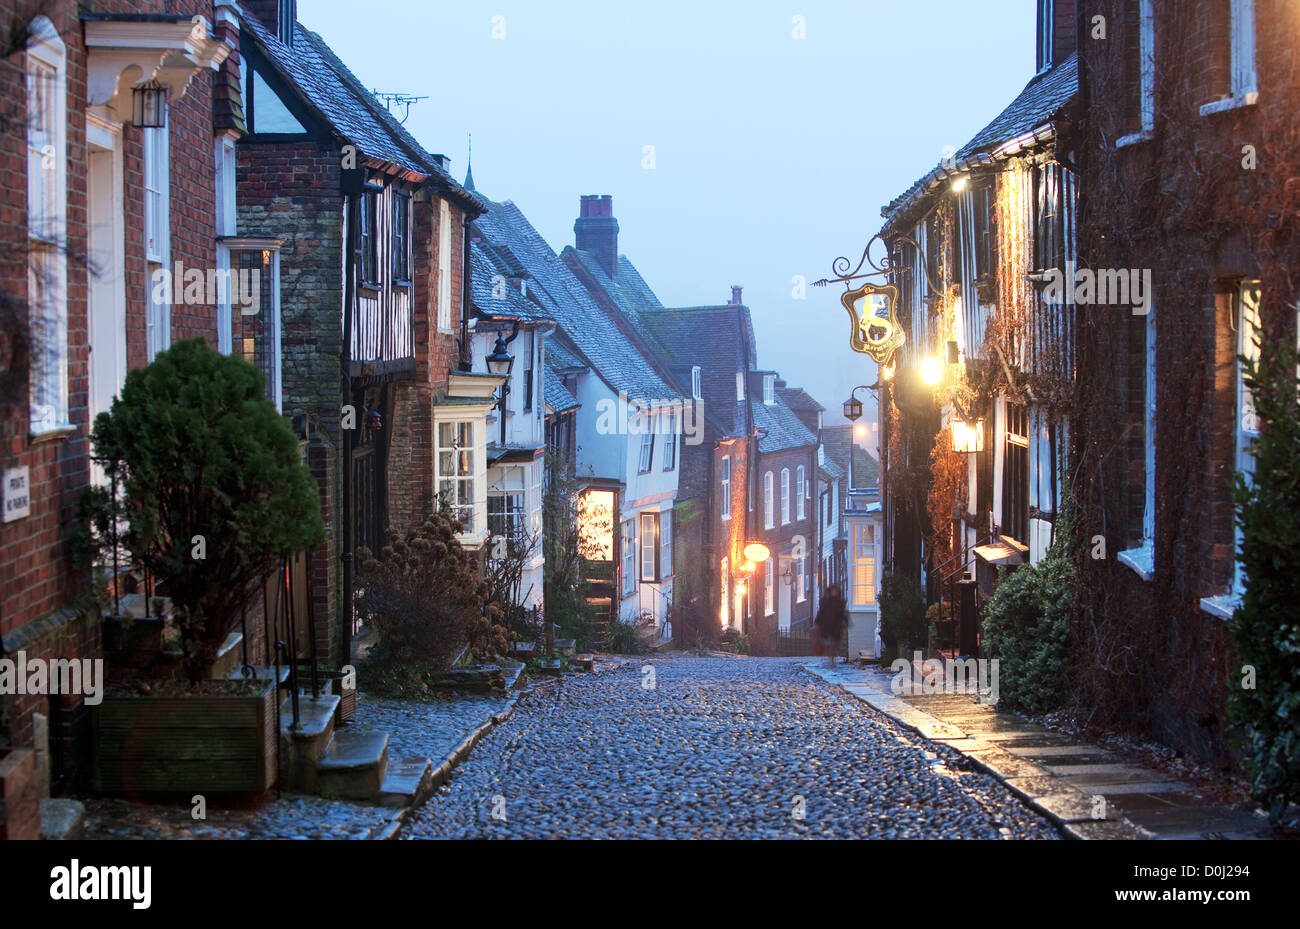 A view down a cobbled street in Rye in East Sussex. Stock Photo